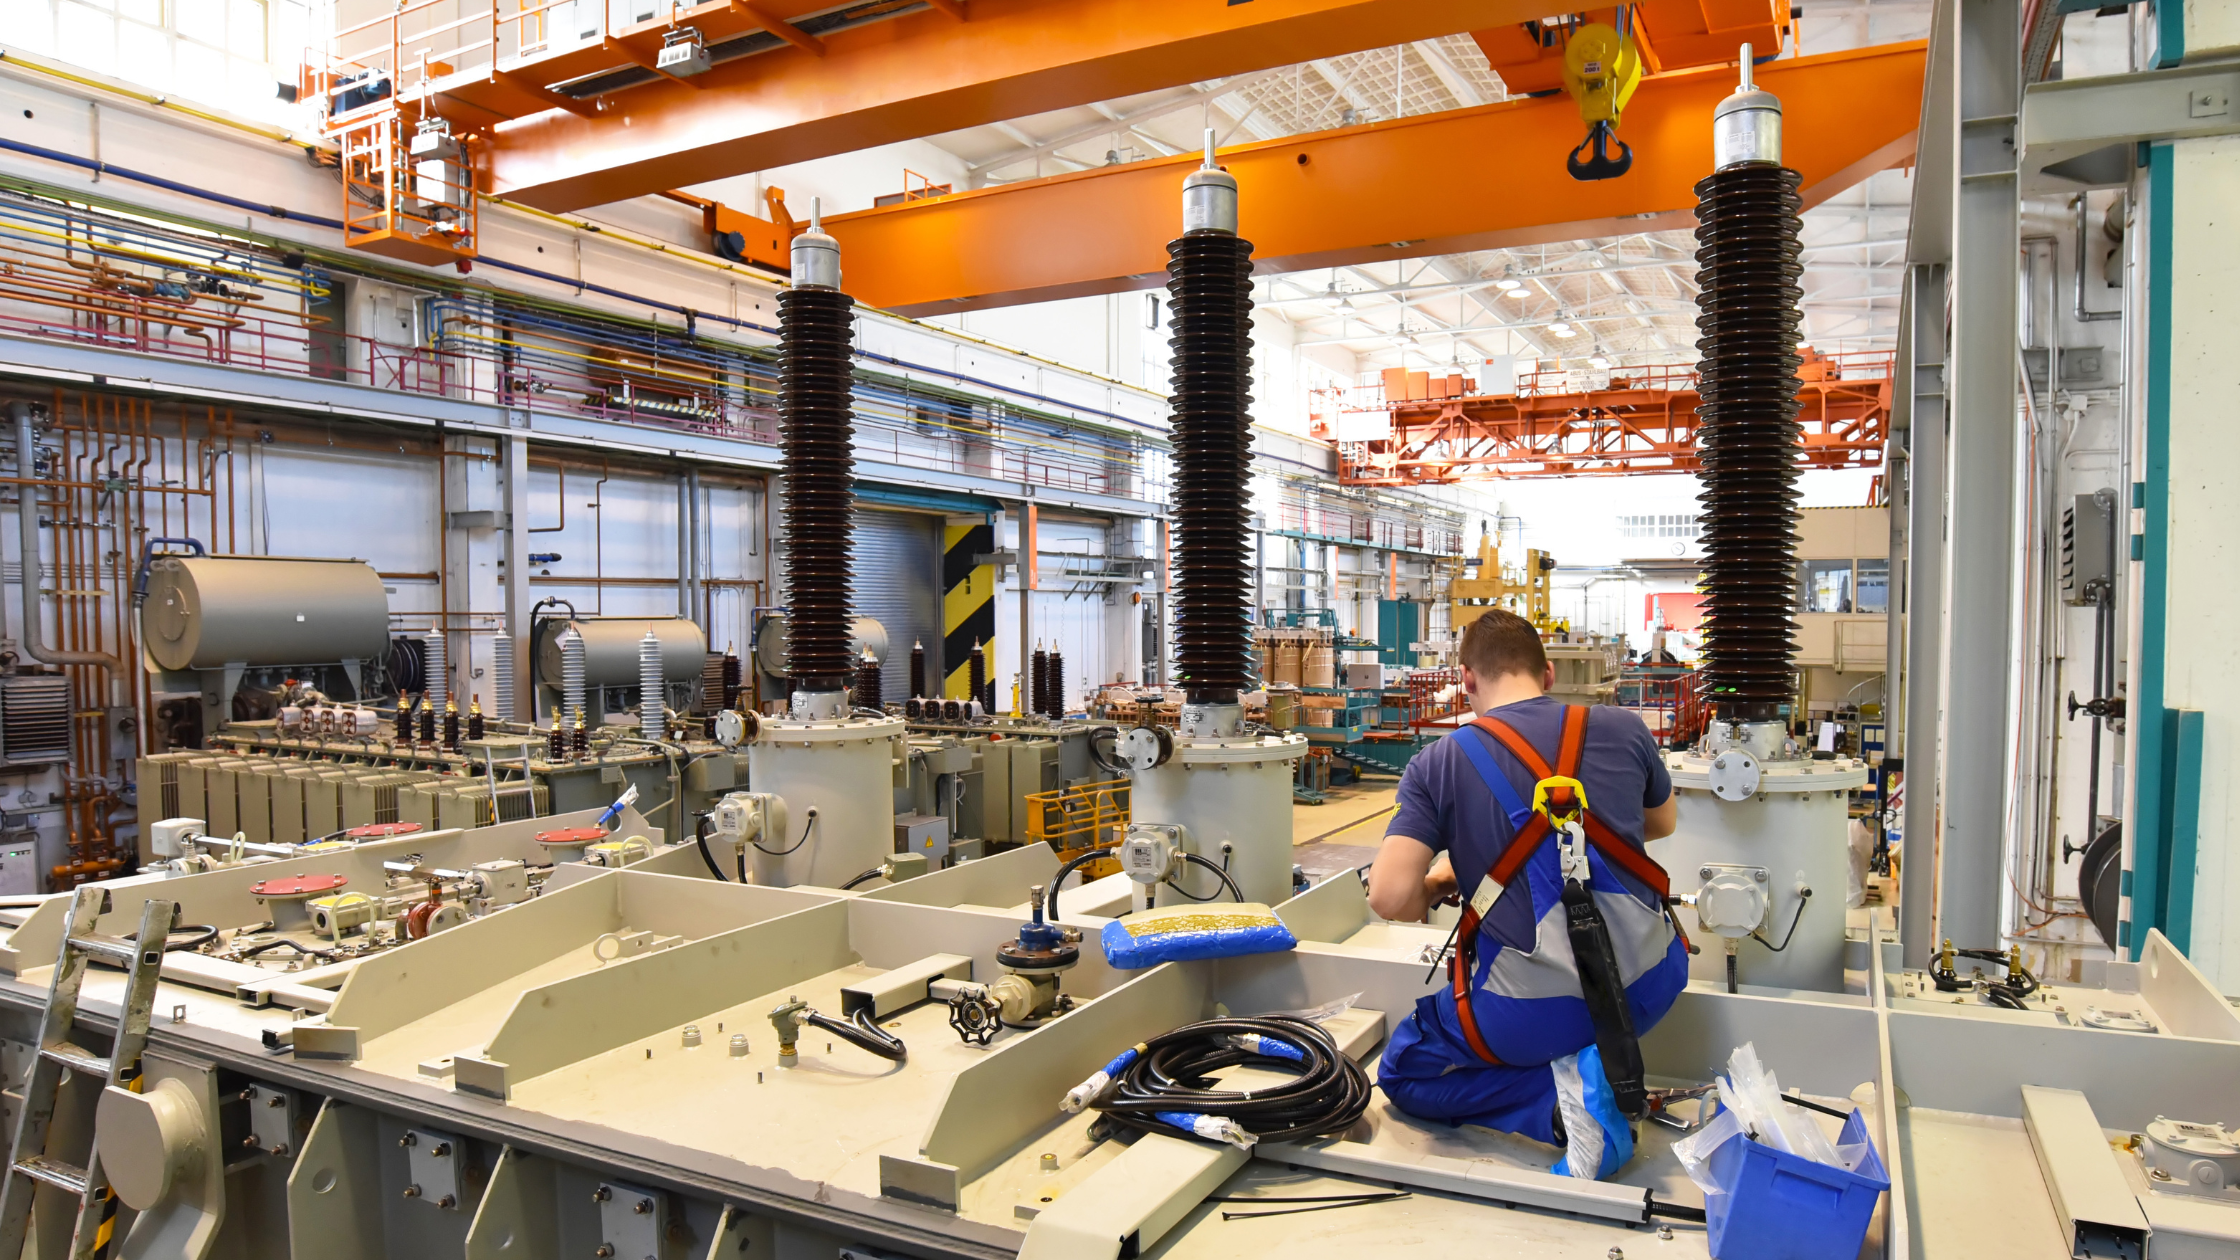 A worker in a harness works to assemble what appears to be equipment for a power substation in a manufacturing facility.